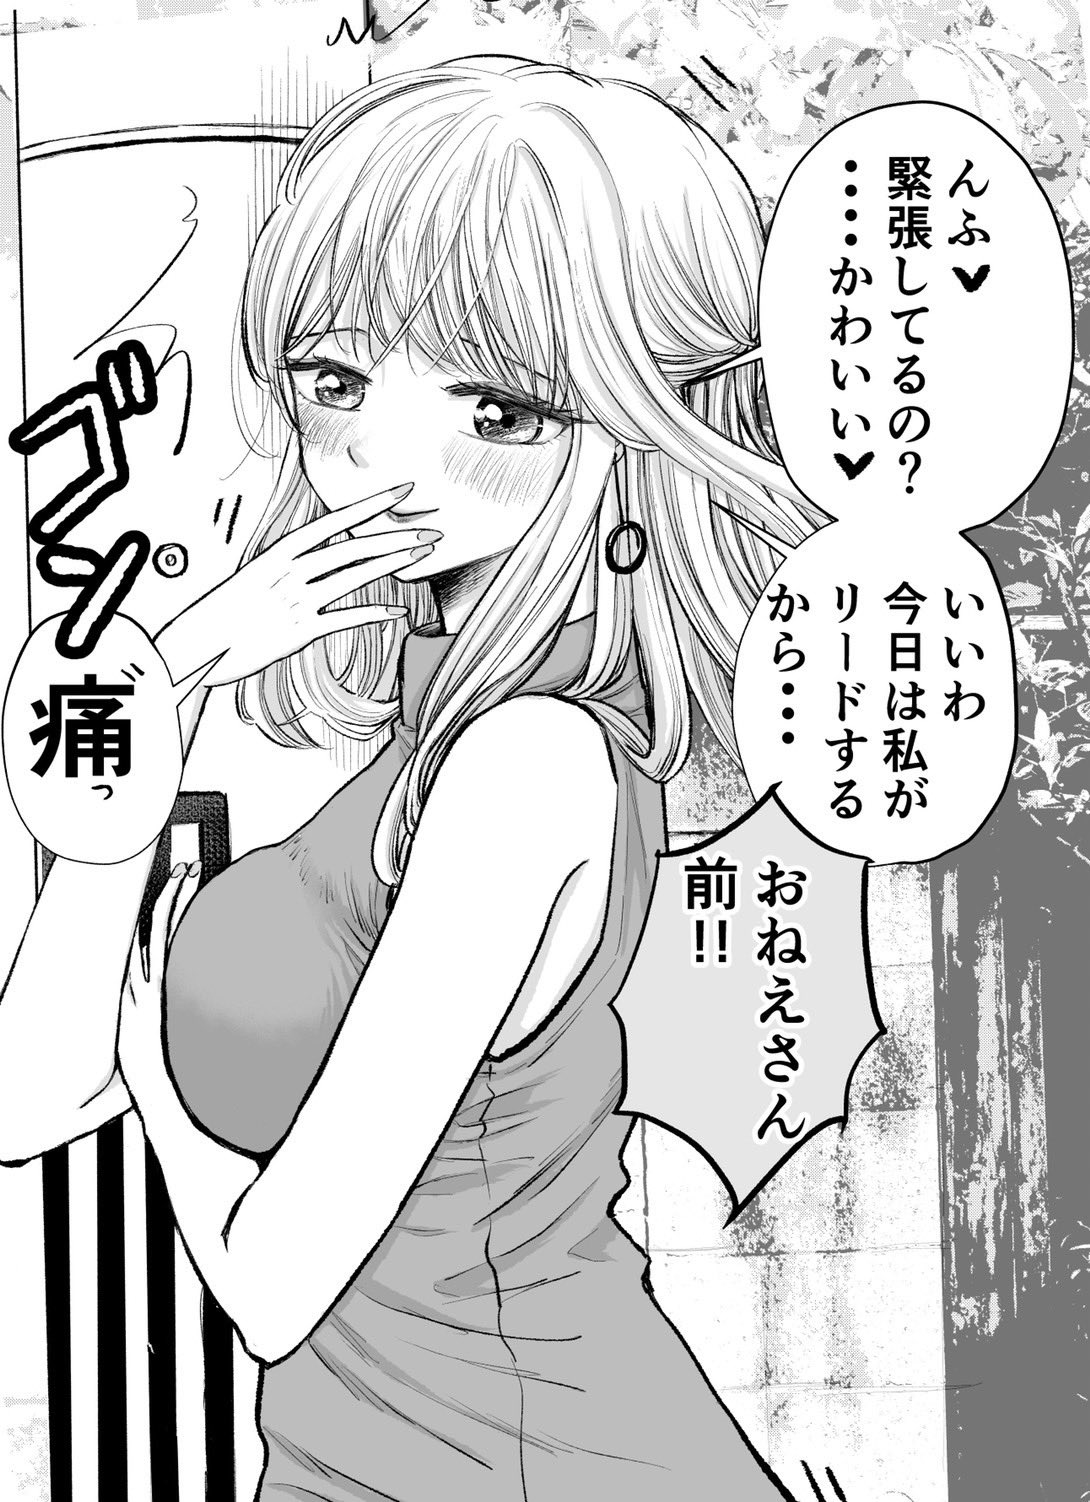 The Story of Finding Out the Onee-san's True Character on the First Date manga